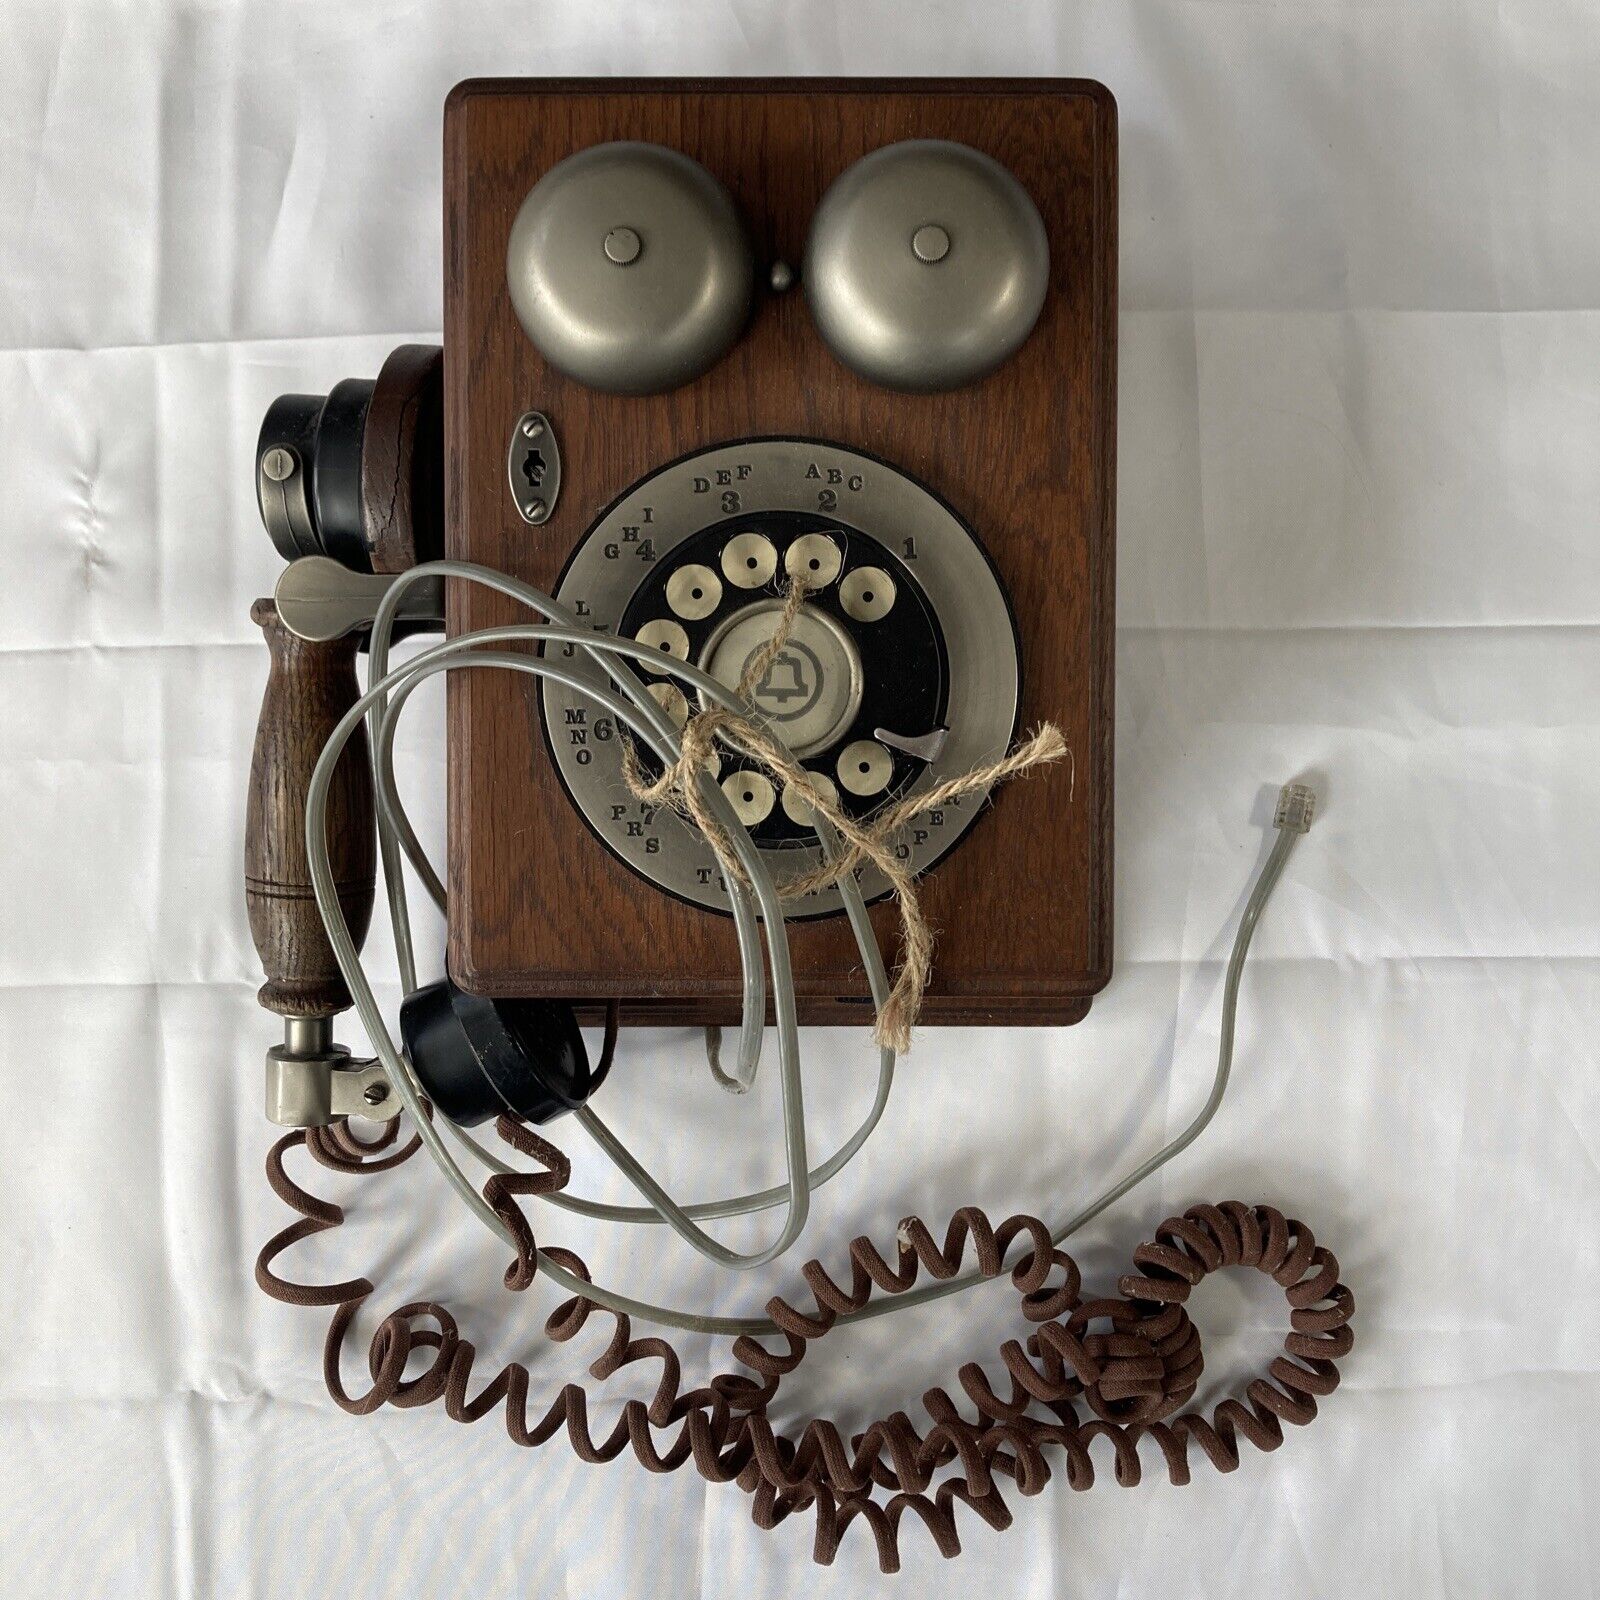 VINTAGE 1980's GENUINE WESTERN ELECTRIC ROTARY DIAL ONLY OAK WOOD WALL TELEPHONE